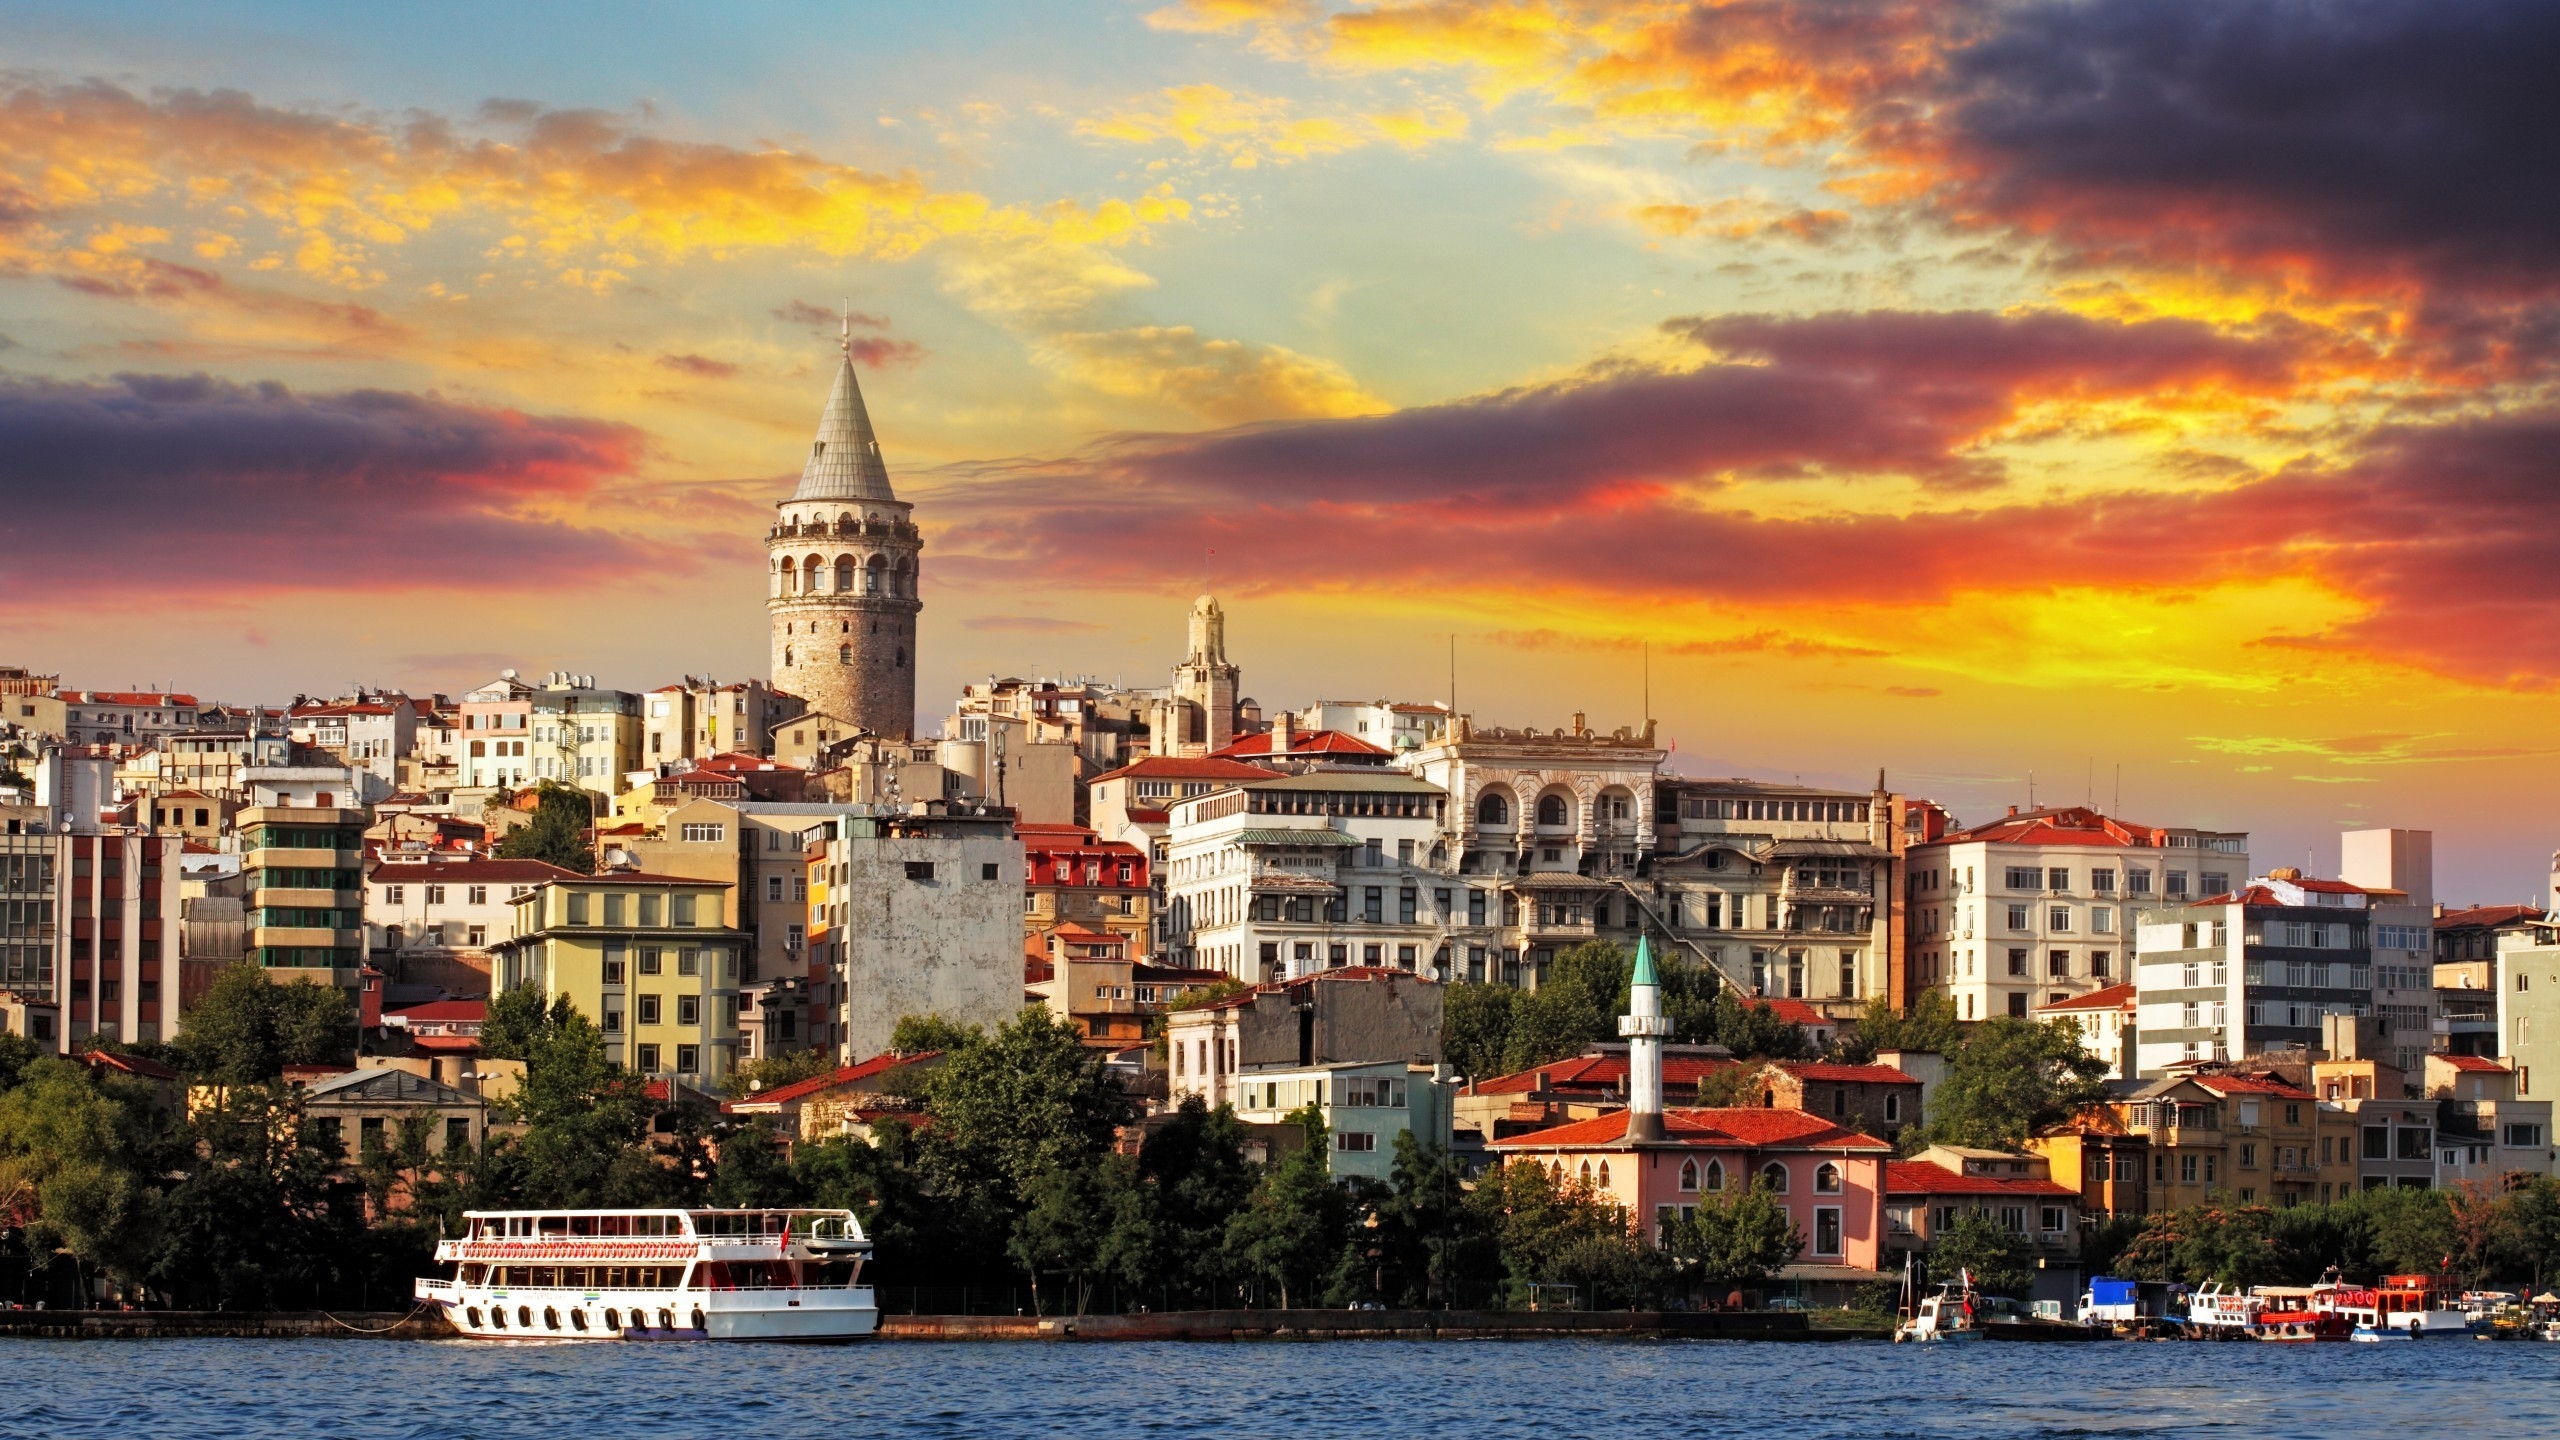 Sunset in Istambul for 2560x1440 HDTV resolution